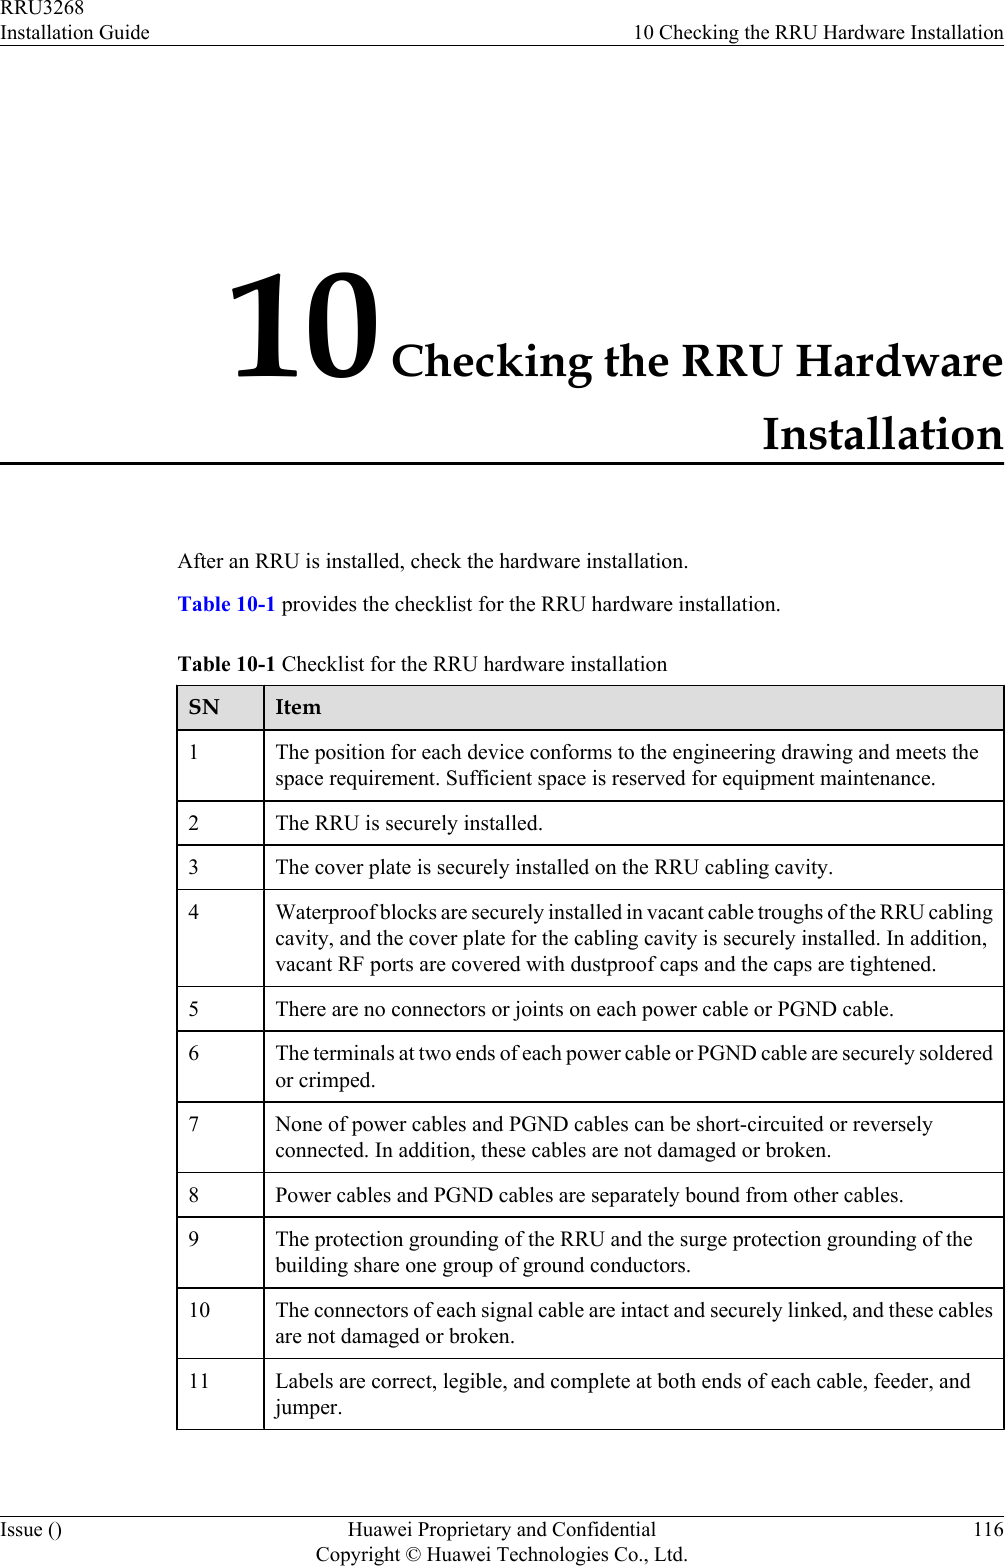 10 Checking the RRU HardwareInstallationAfter an RRU is installed, check the hardware installation.Table 10-1 provides the checklist for the RRU hardware installation.Table 10-1 Checklist for the RRU hardware installationSN Item1The position for each device conforms to the engineering drawing and meets thespace requirement. Sufficient space is reserved for equipment maintenance.2 The RRU is securely installed.3 The cover plate is securely installed on the RRU cabling cavity.4 Waterproof blocks are securely installed in vacant cable troughs of the RRU cablingcavity, and the cover plate for the cabling cavity is securely installed. In addition,vacant RF ports are covered with dustproof caps and the caps are tightened.5 There are no connectors or joints on each power cable or PGND cable.6 The terminals at two ends of each power cable or PGND cable are securely solderedor crimped.7 None of power cables and PGND cables can be short-circuited or reverselyconnected. In addition, these cables are not damaged or broken.8 Power cables and PGND cables are separately bound from other cables.9 The protection grounding of the RRU and the surge protection grounding of thebuilding share one group of ground conductors.10 The connectors of each signal cable are intact and securely linked, and these cablesare not damaged or broken.11 Labels are correct, legible, and complete at both ends of each cable, feeder, andjumper.RRU3268Installation Guide 10 Checking the RRU Hardware InstallationIssue () Huawei Proprietary and ConfidentialCopyright © Huawei Technologies Co., Ltd.116